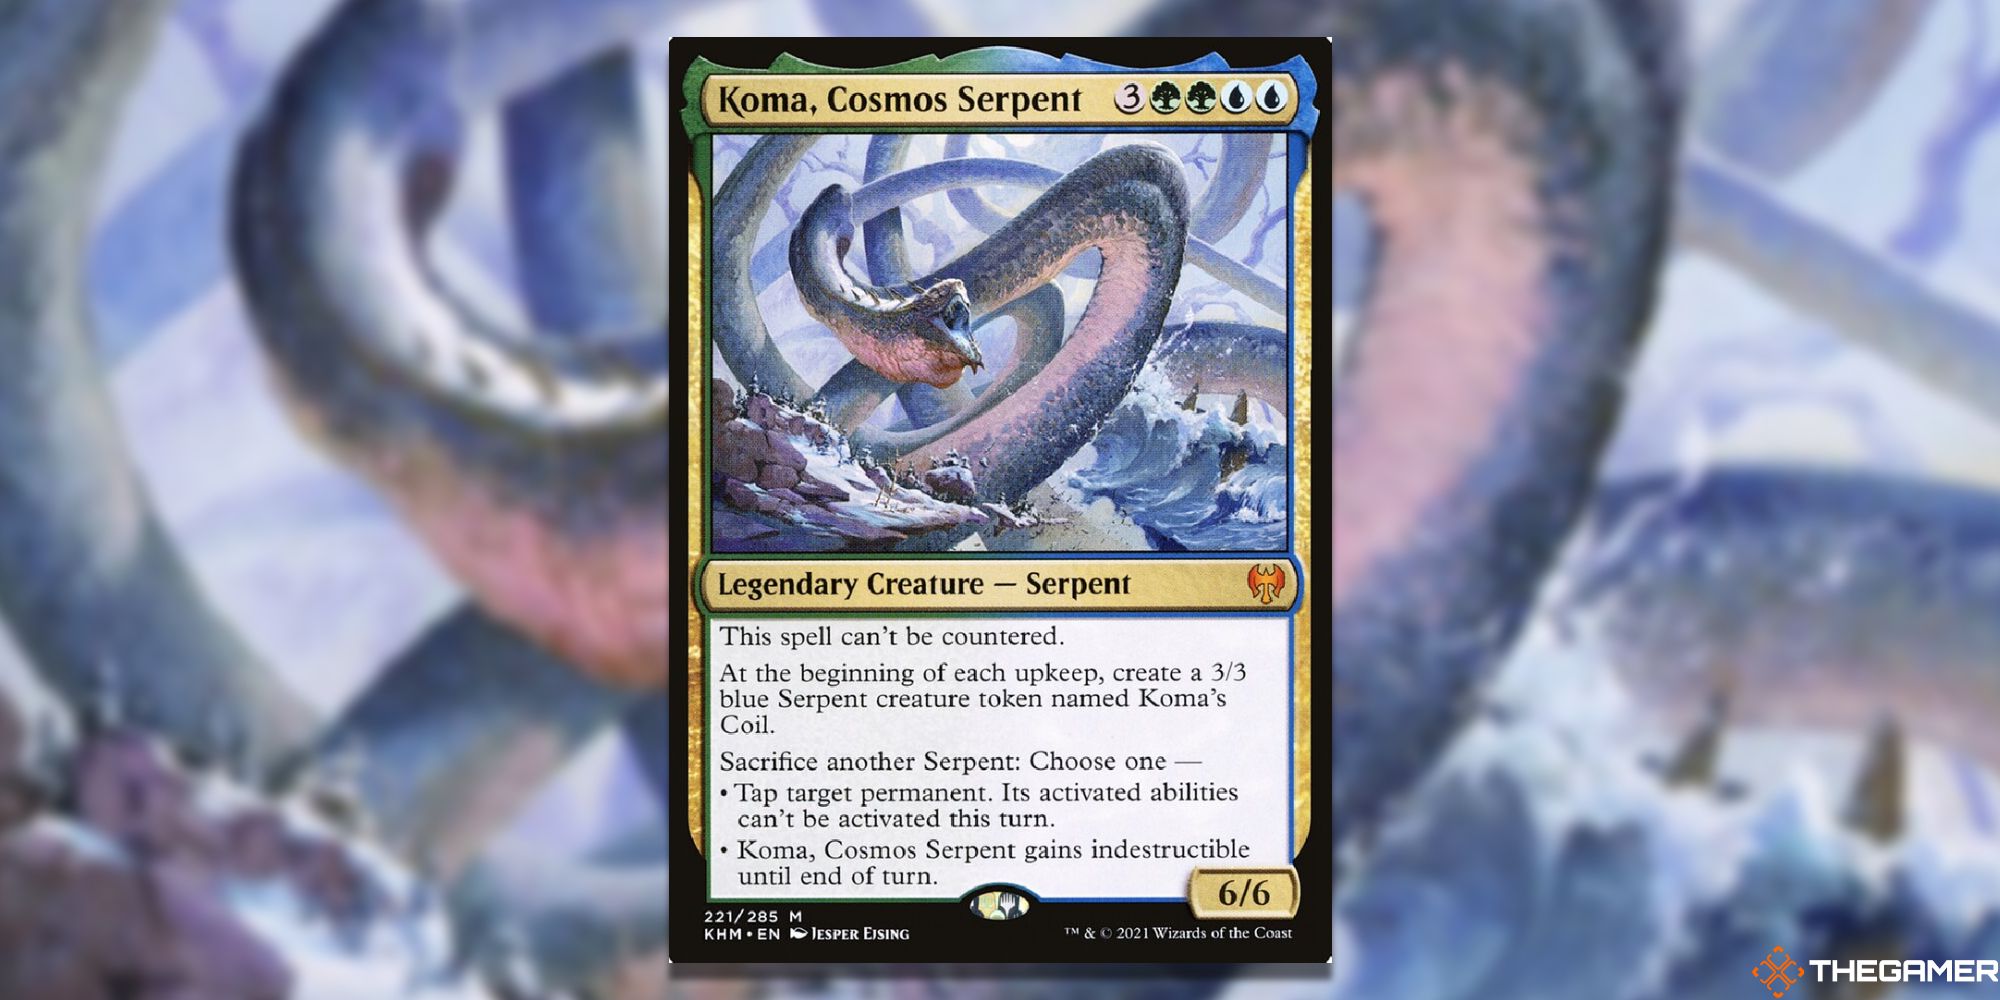 Magic: The Gathering Koma, Cosmos Serpent full card with background